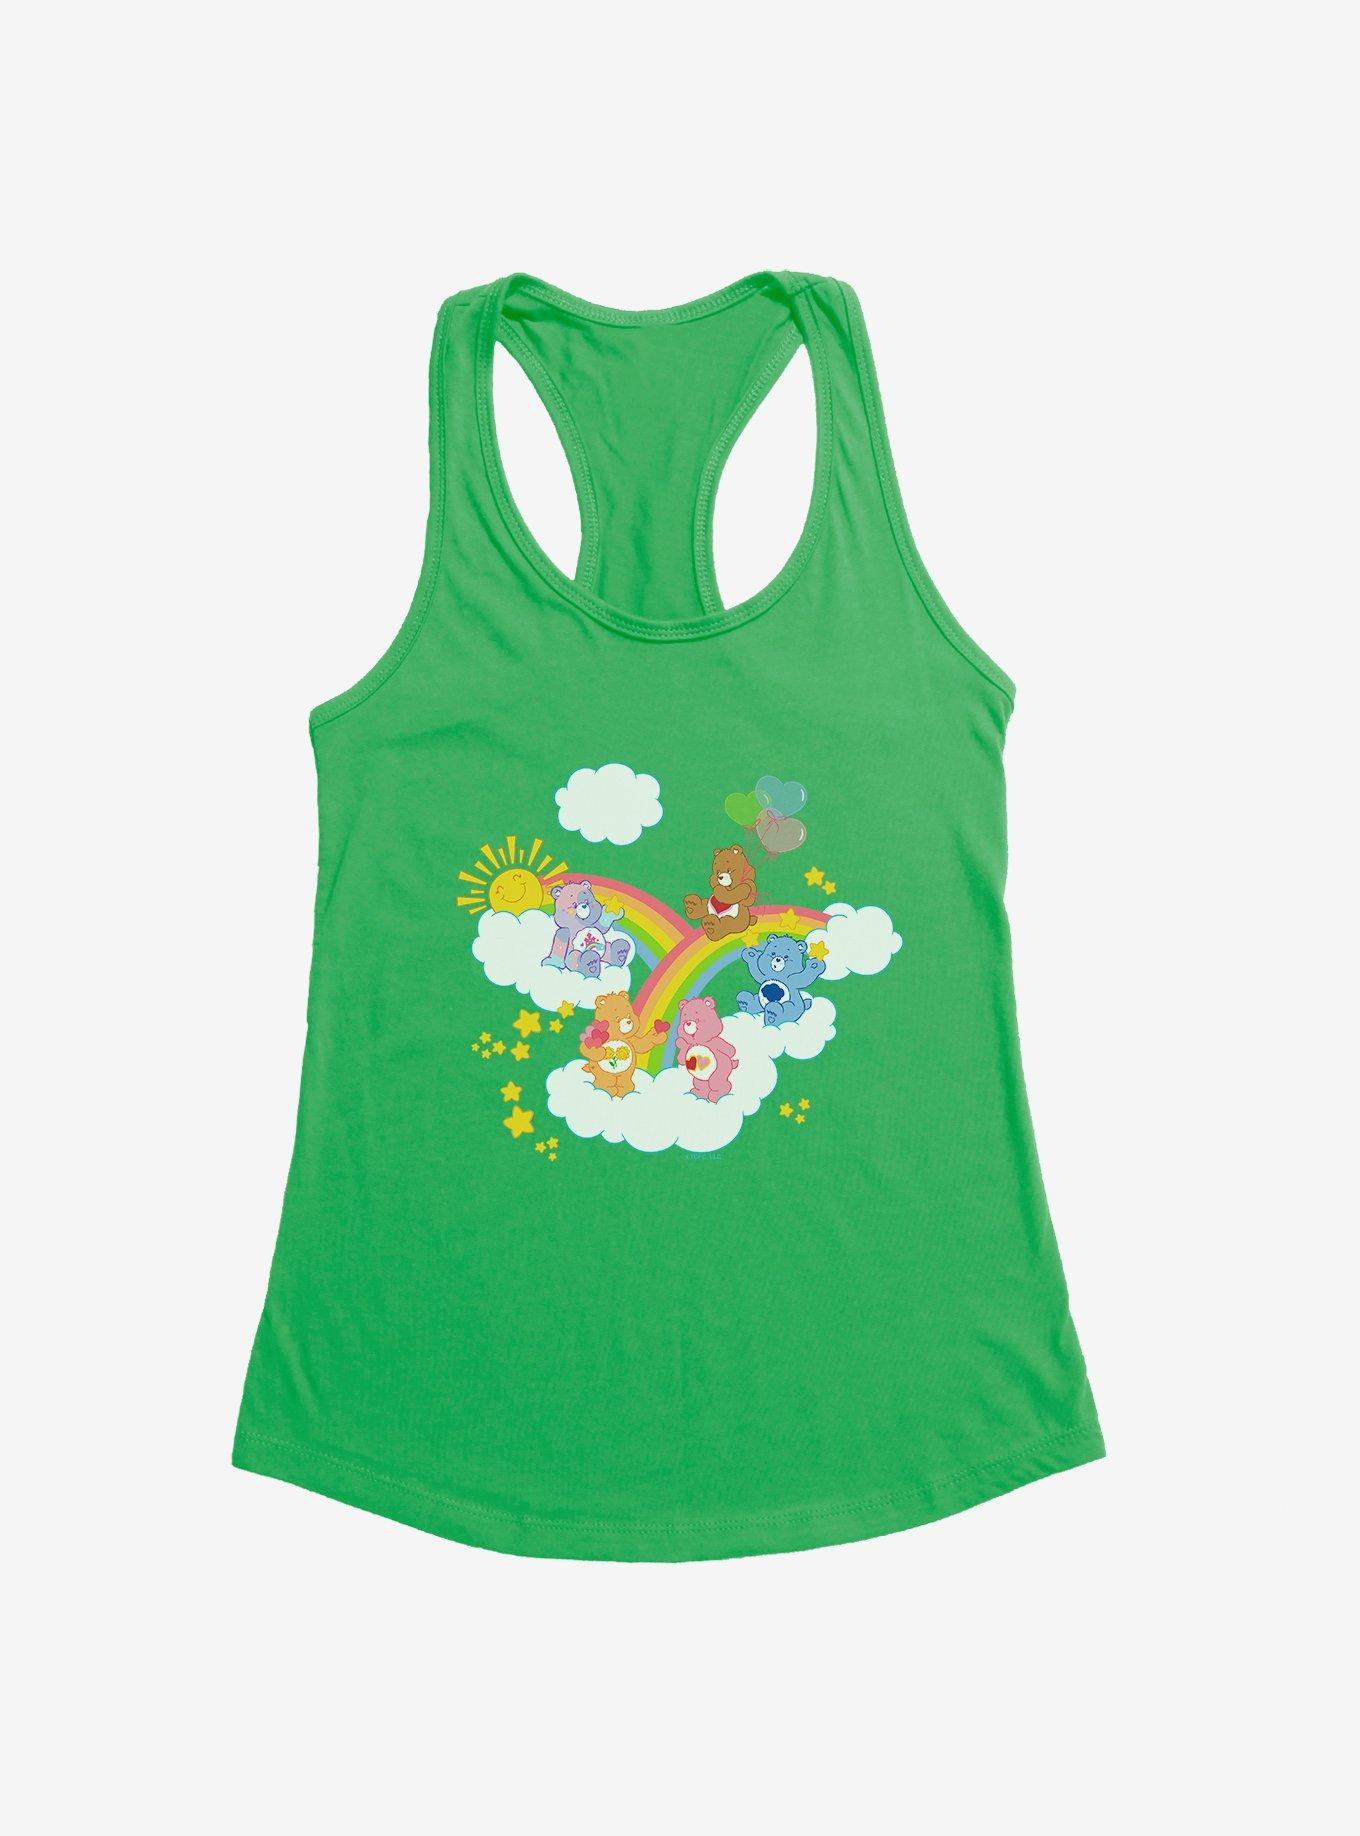 Care Bears Over The Rainbow Girls Tank Top, KELLY GREEN, hi-res